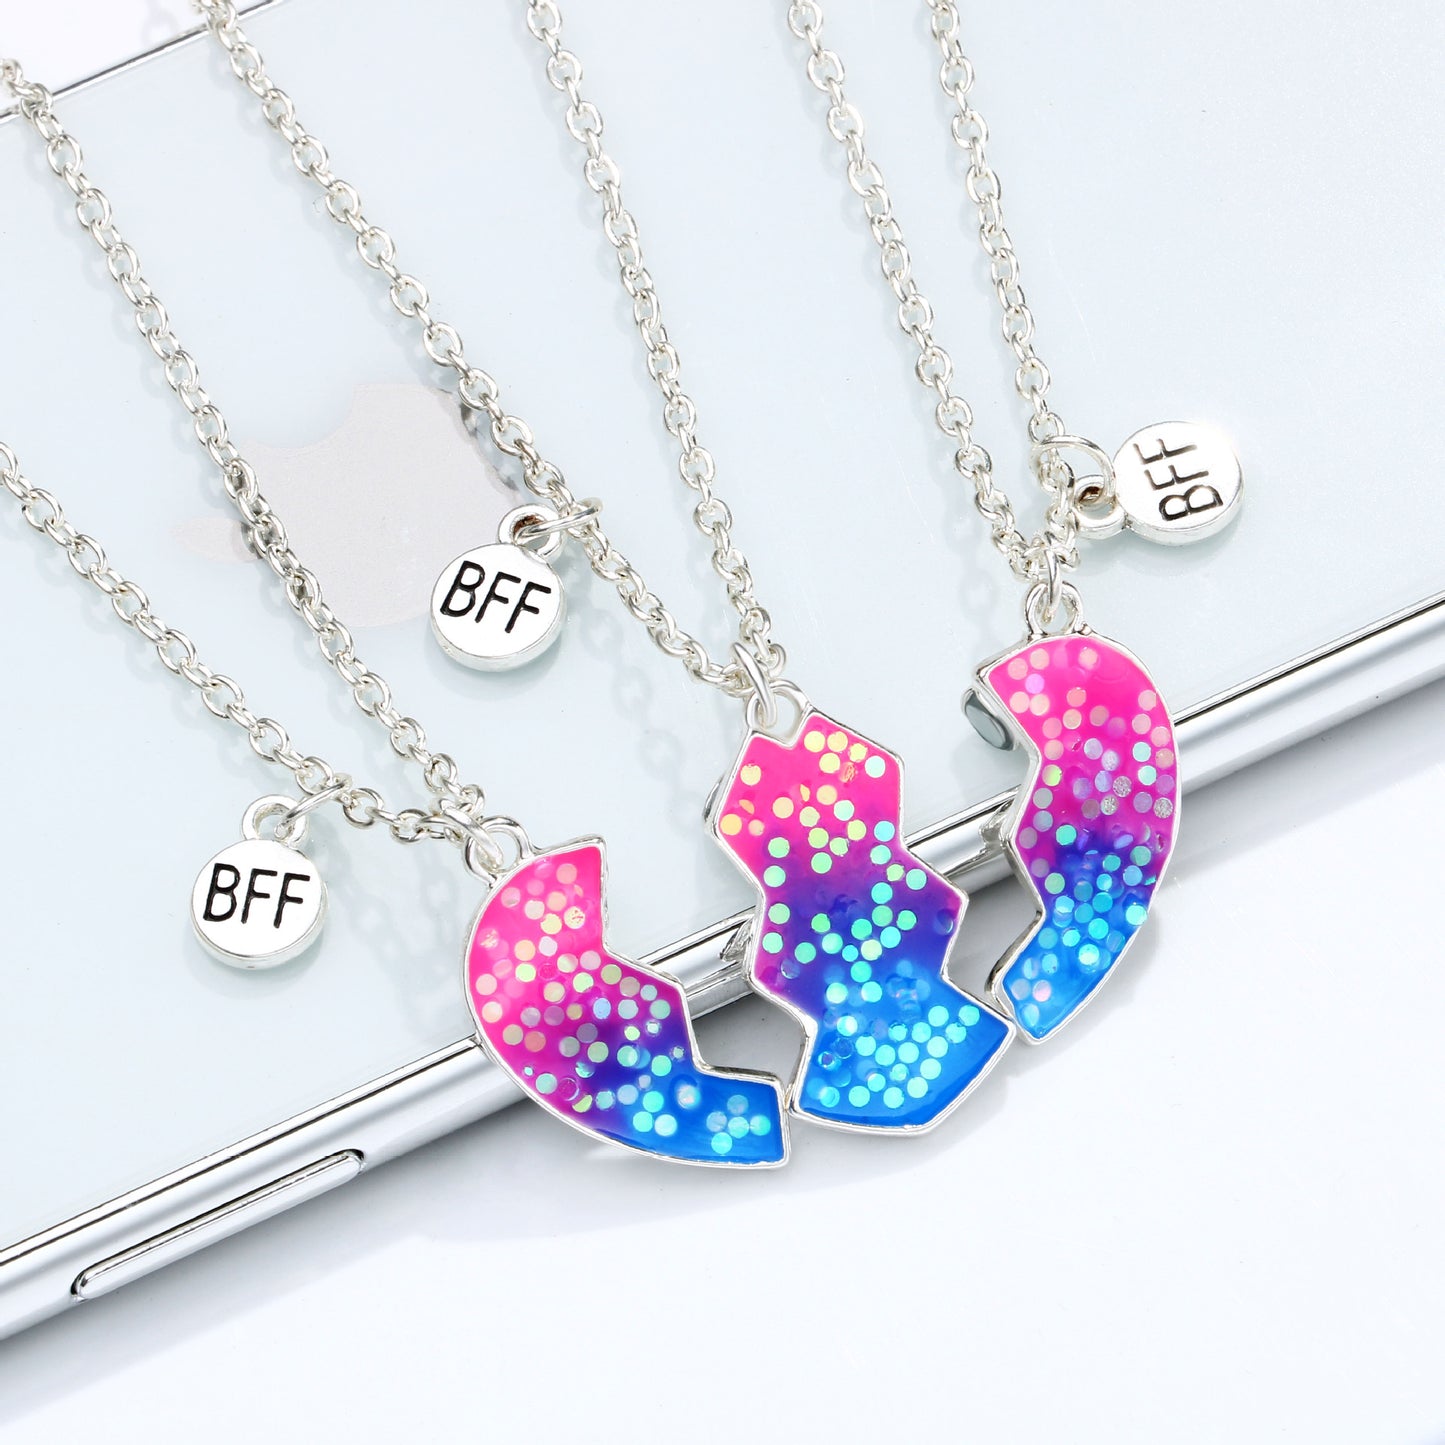 Magnetic Hearts Bff Necklaces Set for 3 Persons